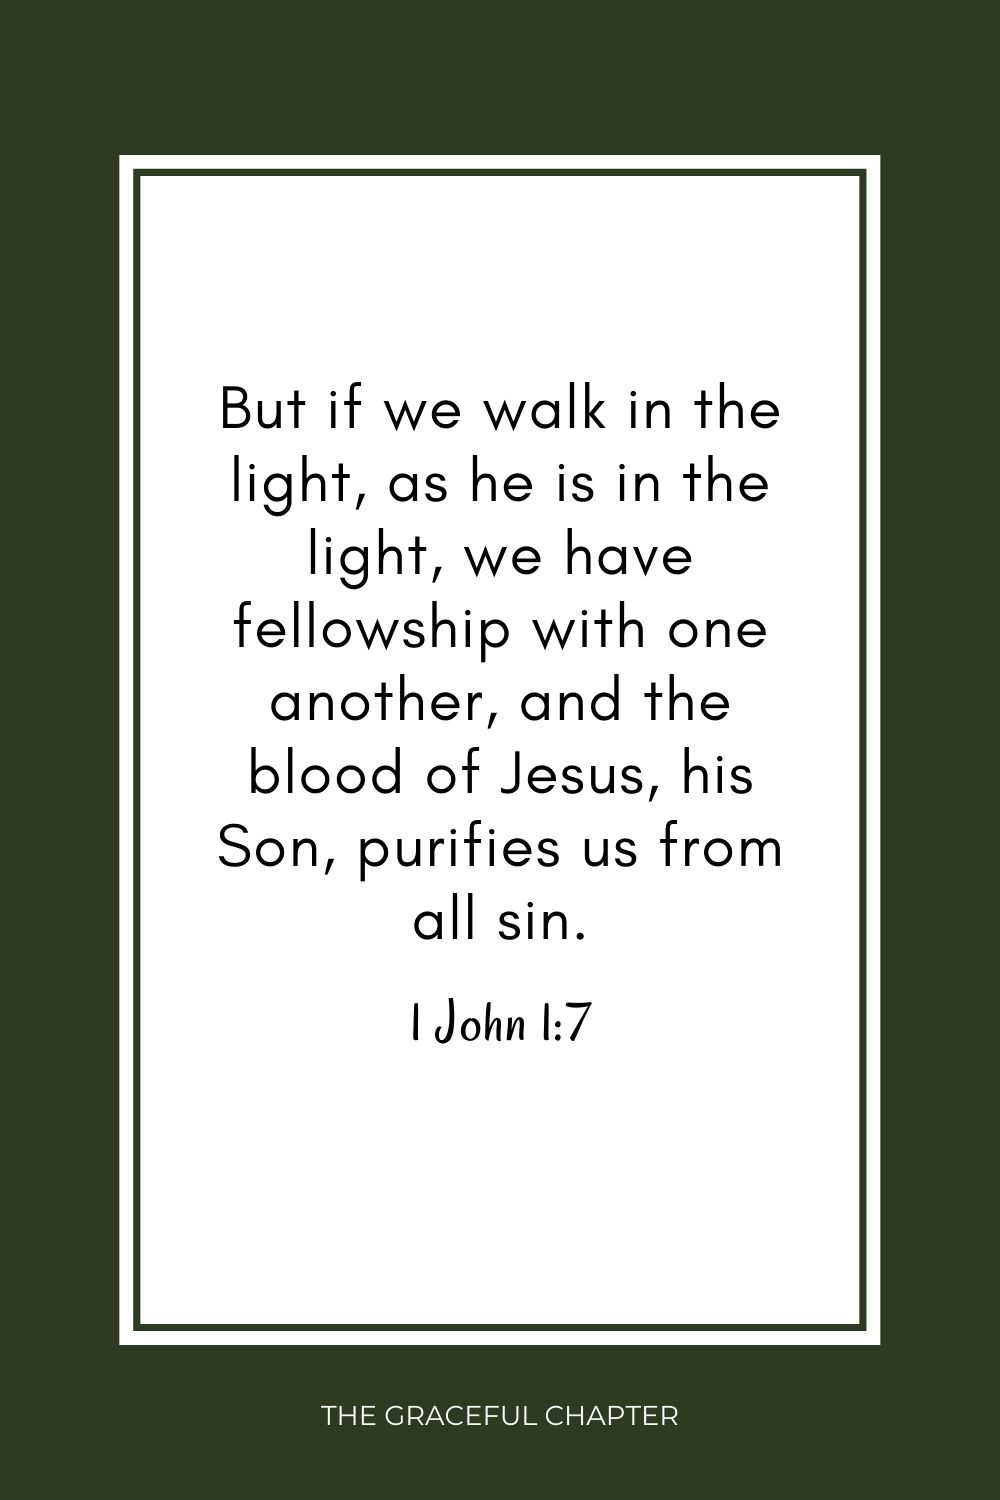 But if we walk in the light, as he is in the light, we have fellowship with one another, and the blood of Jesus, his Son, purifies us from all sin. 1 John 1:7